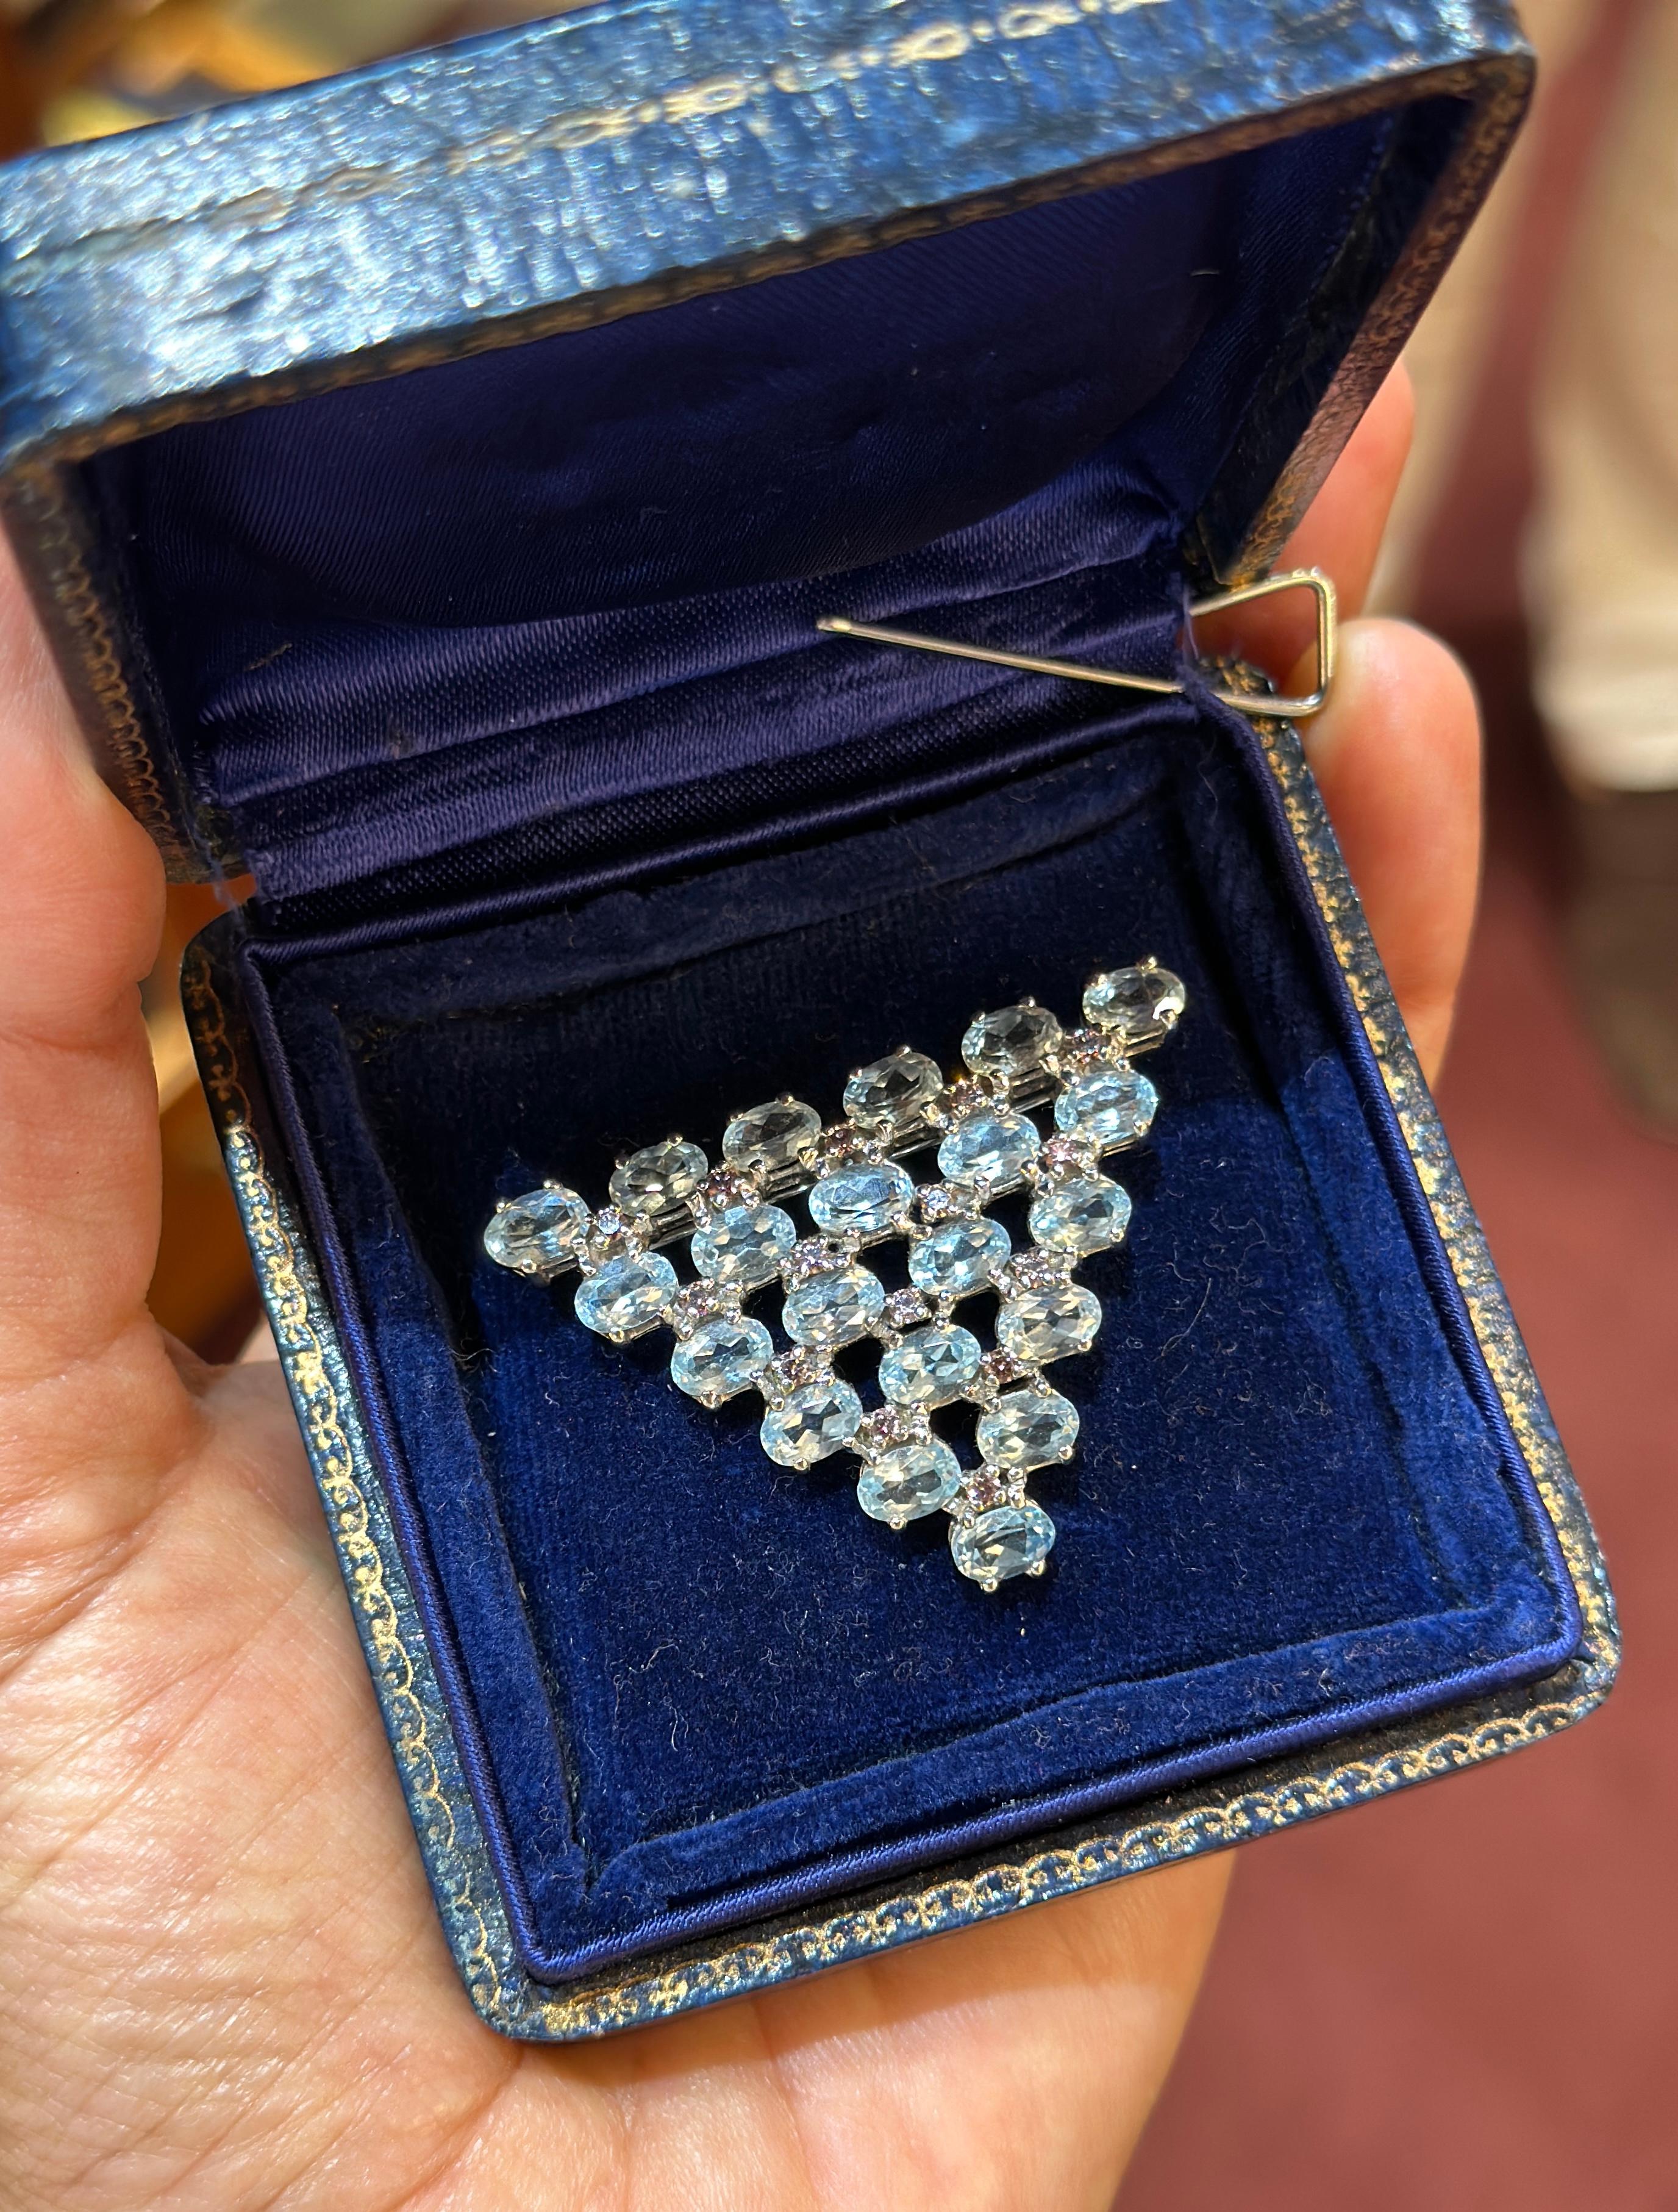 Circa 1935, a Vintage Platinum Triangle - Shaped Brooch / Pin, is Set with Aquamarines and Diamonds Round Cut ( H Color, VS1 - SI1 Clarity)
Estimated total Aquamarine Weight is 10 carats.
Aproximate total Diamonds Weight is 1,23 carats.
Could be